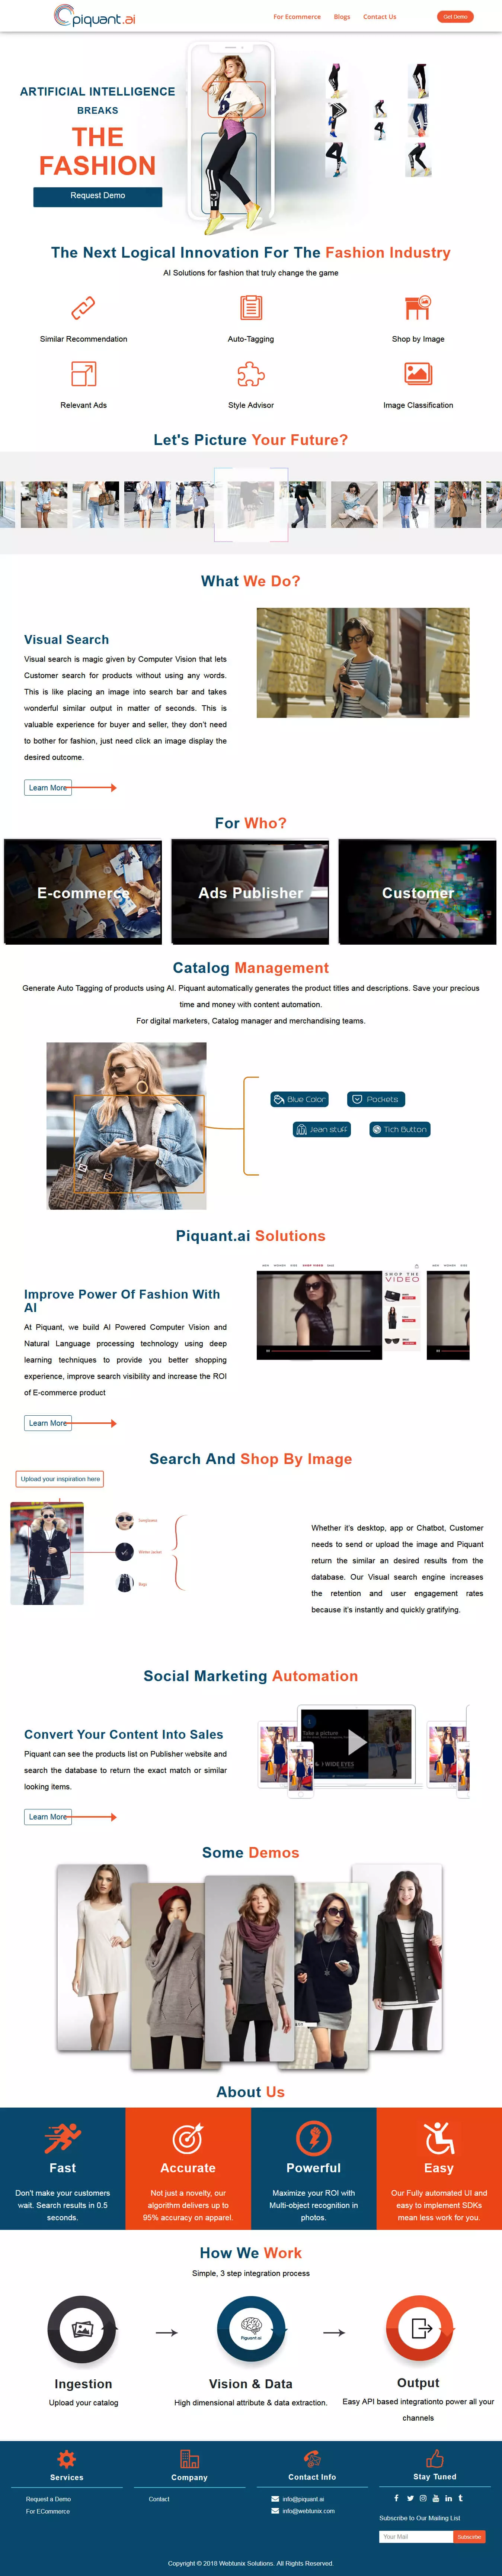 piquant - fashion recommendation with machine learning